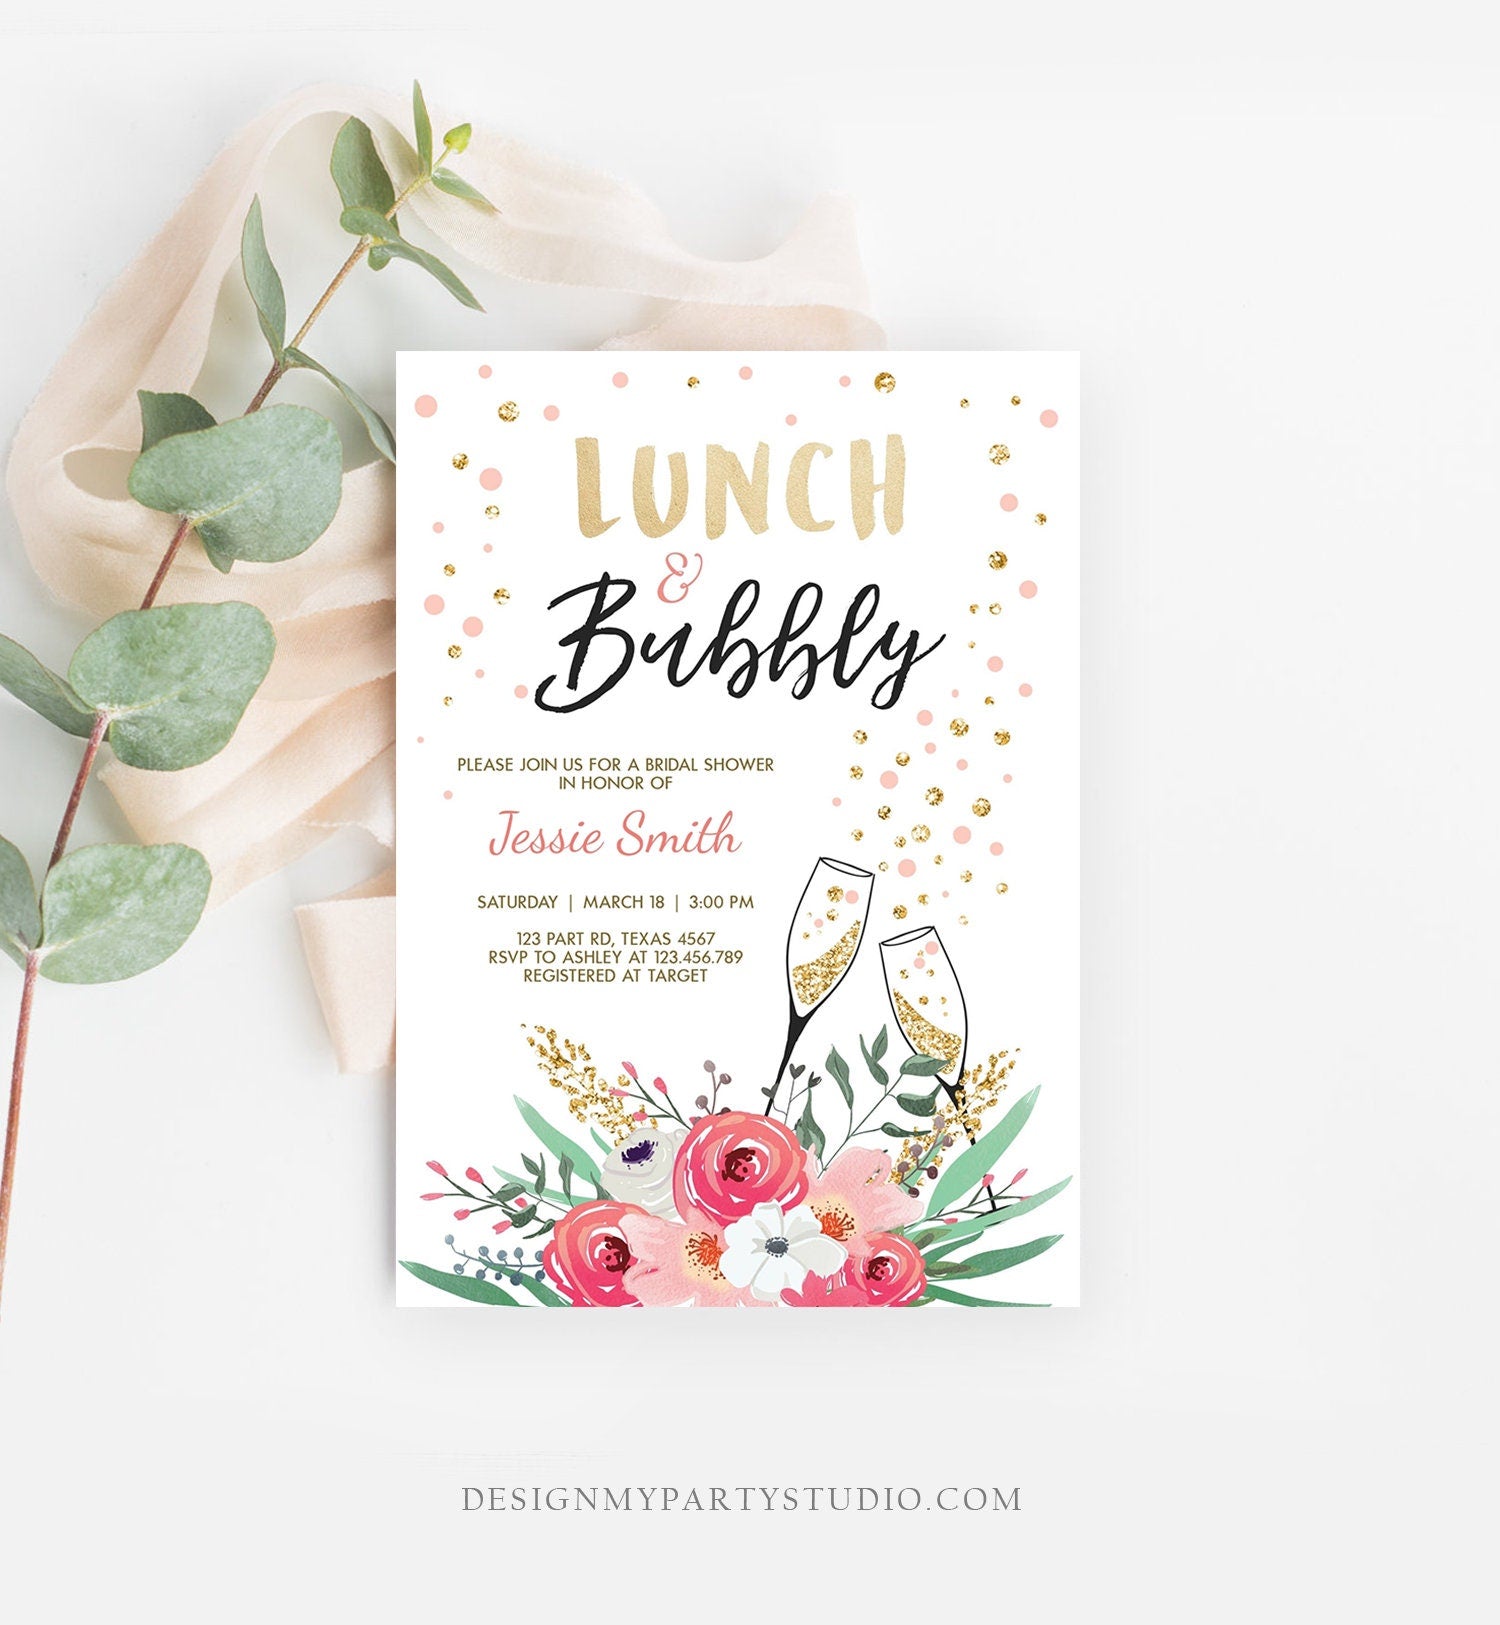 Editable Lunch and Bubbly Bridal Shower Invitation Floral Champagne Gold Pink Wedding Brunch Download Printable Template Digital Corjl 0318